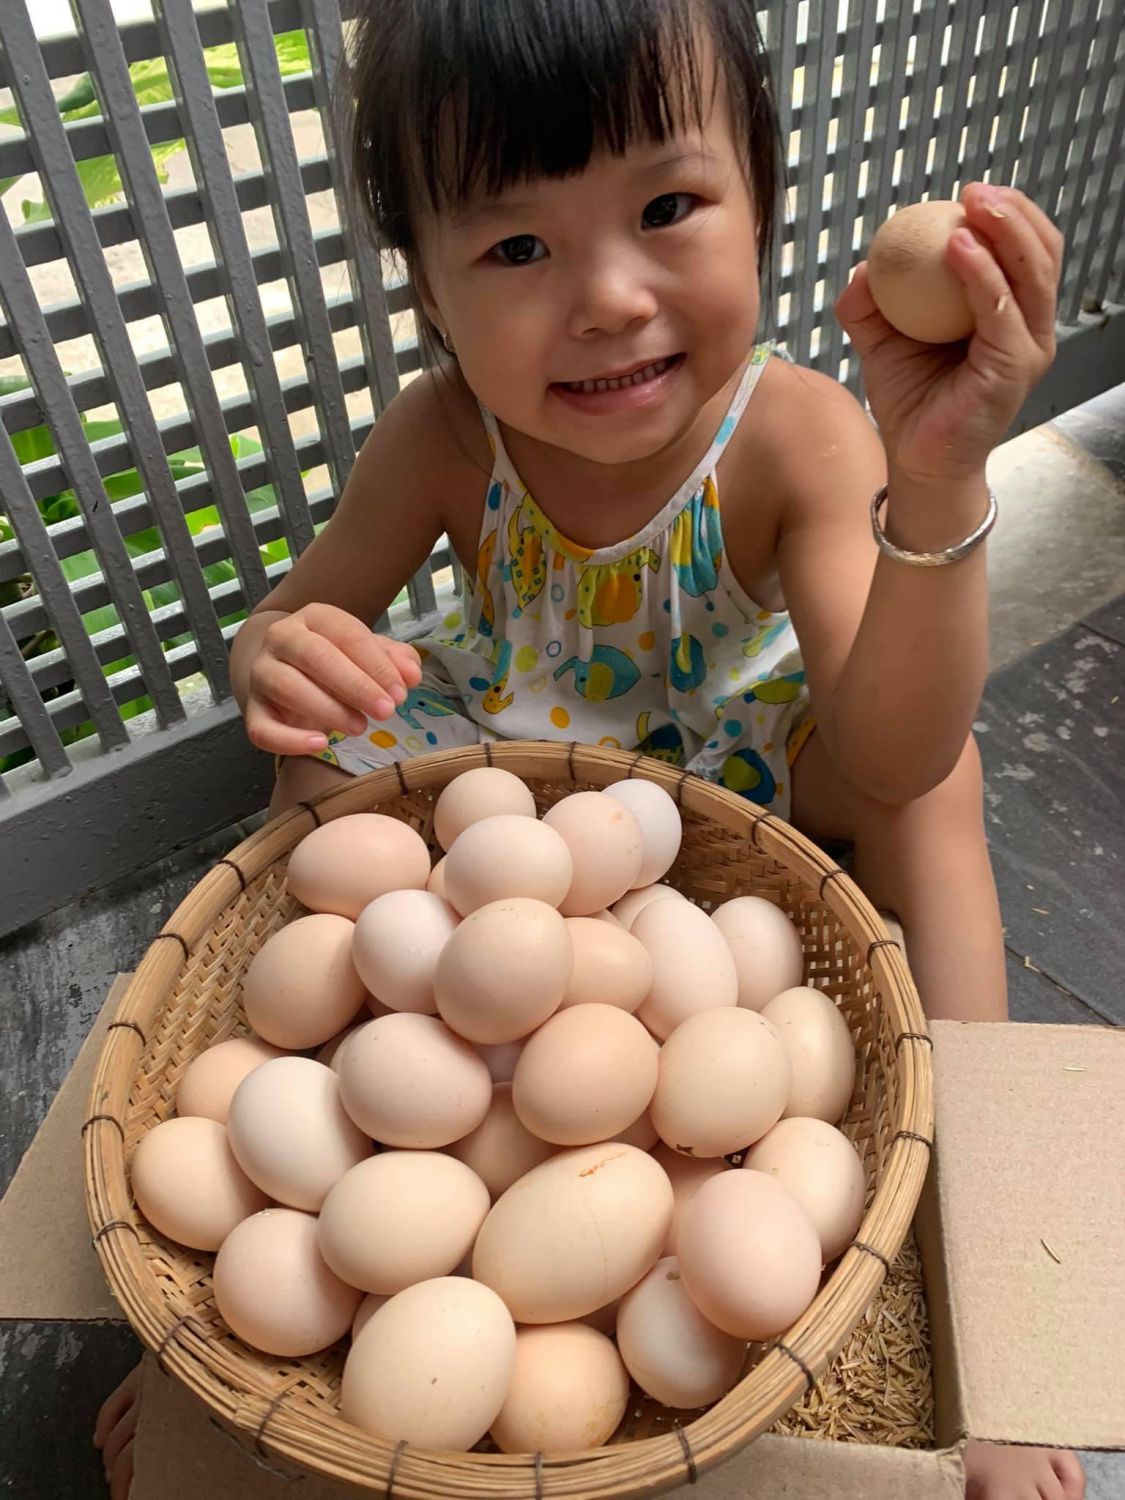 Silkie eggs are one of nature's most nutrient-dense foods, packed with vitamins and minerals that are essential for good health